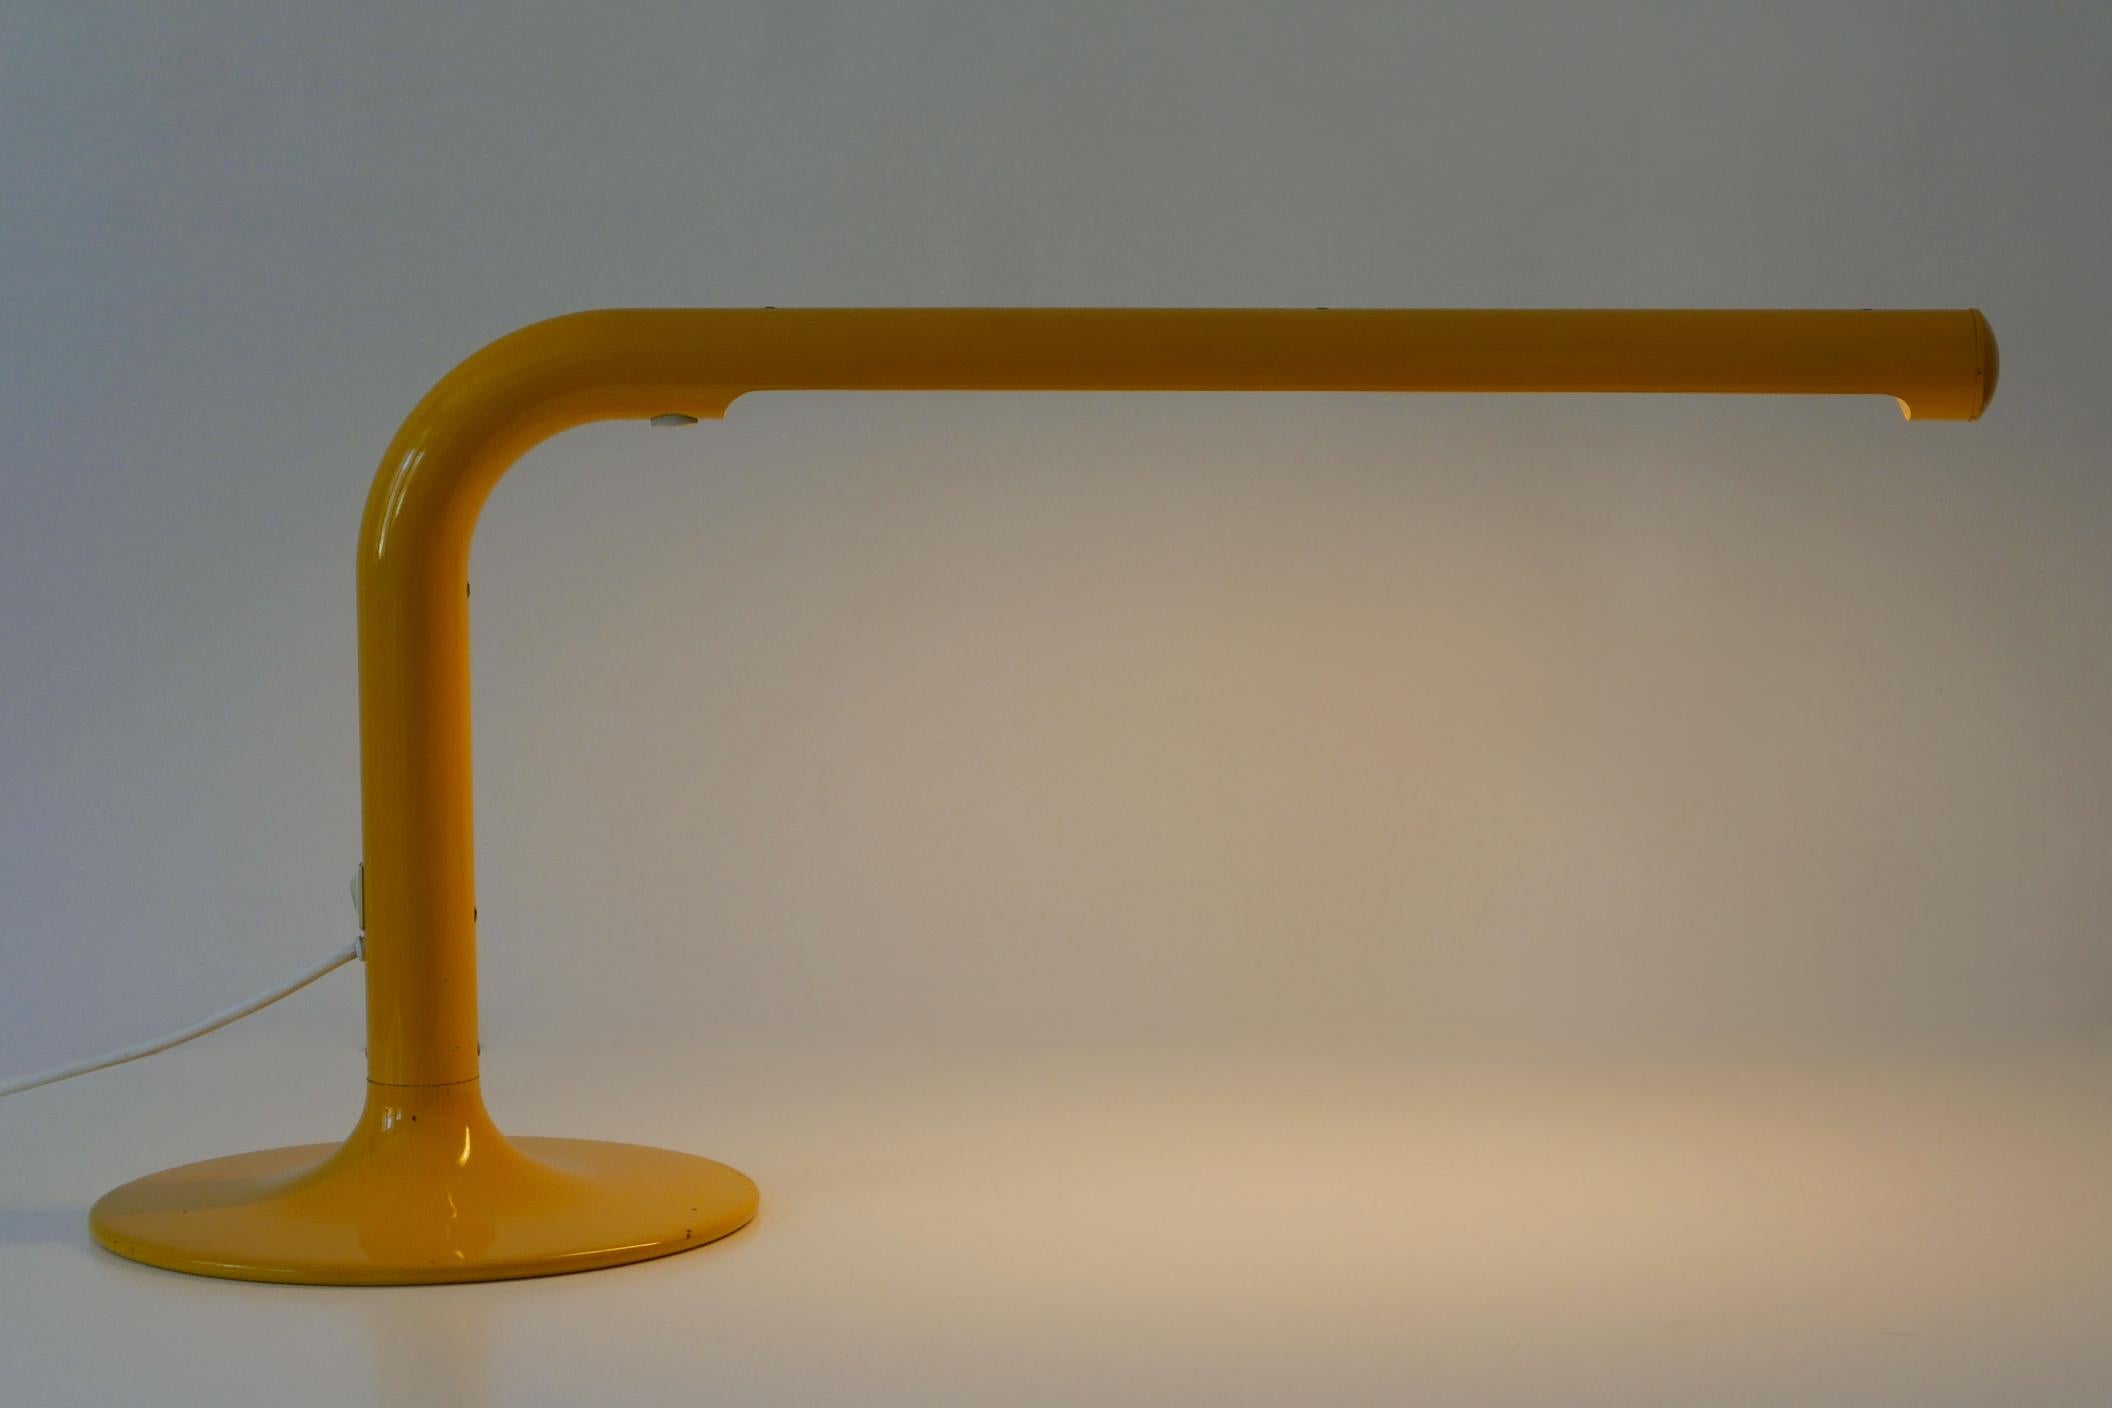 Large & Elegant Tube Table Lamp by Anders Pehrson for Ateljé Lyktan, 1960s For Sale 1